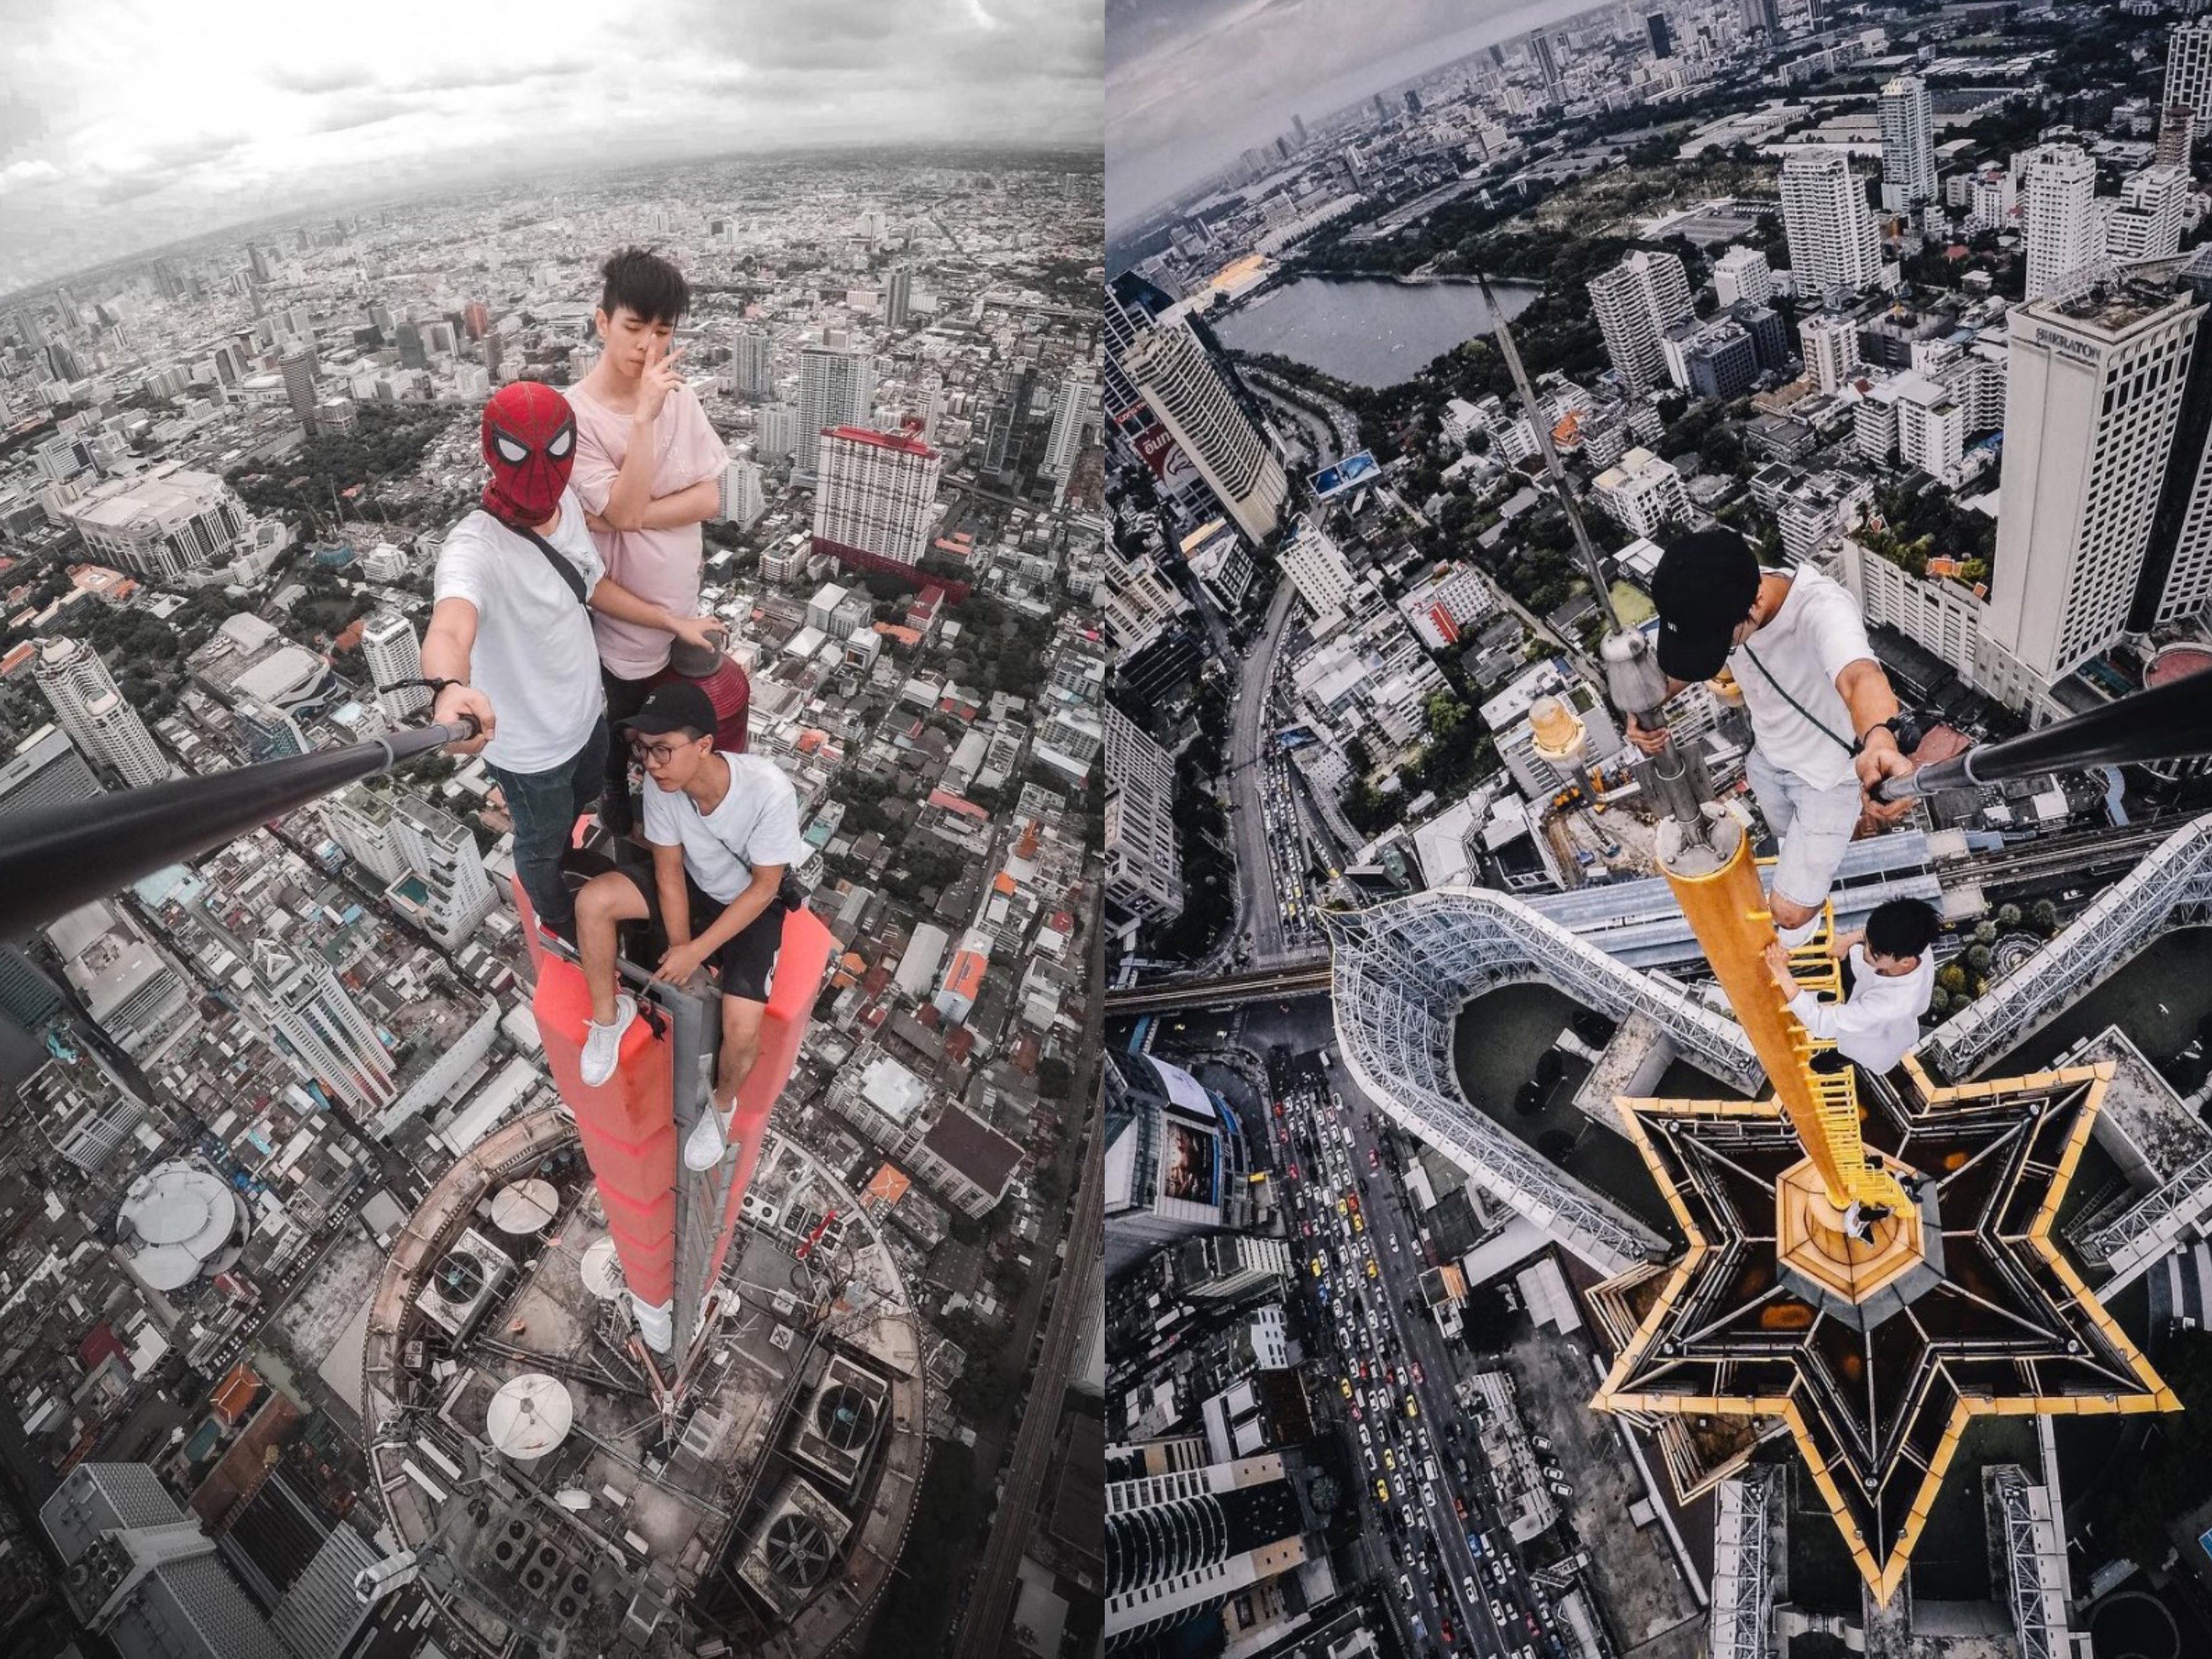 Samuel Chan from Hong Kong with two others on top of Baiyoke Tower II and Terminal 21 shopping mall. PHOTOS: Instagram/2.25c (Samuel Chan)